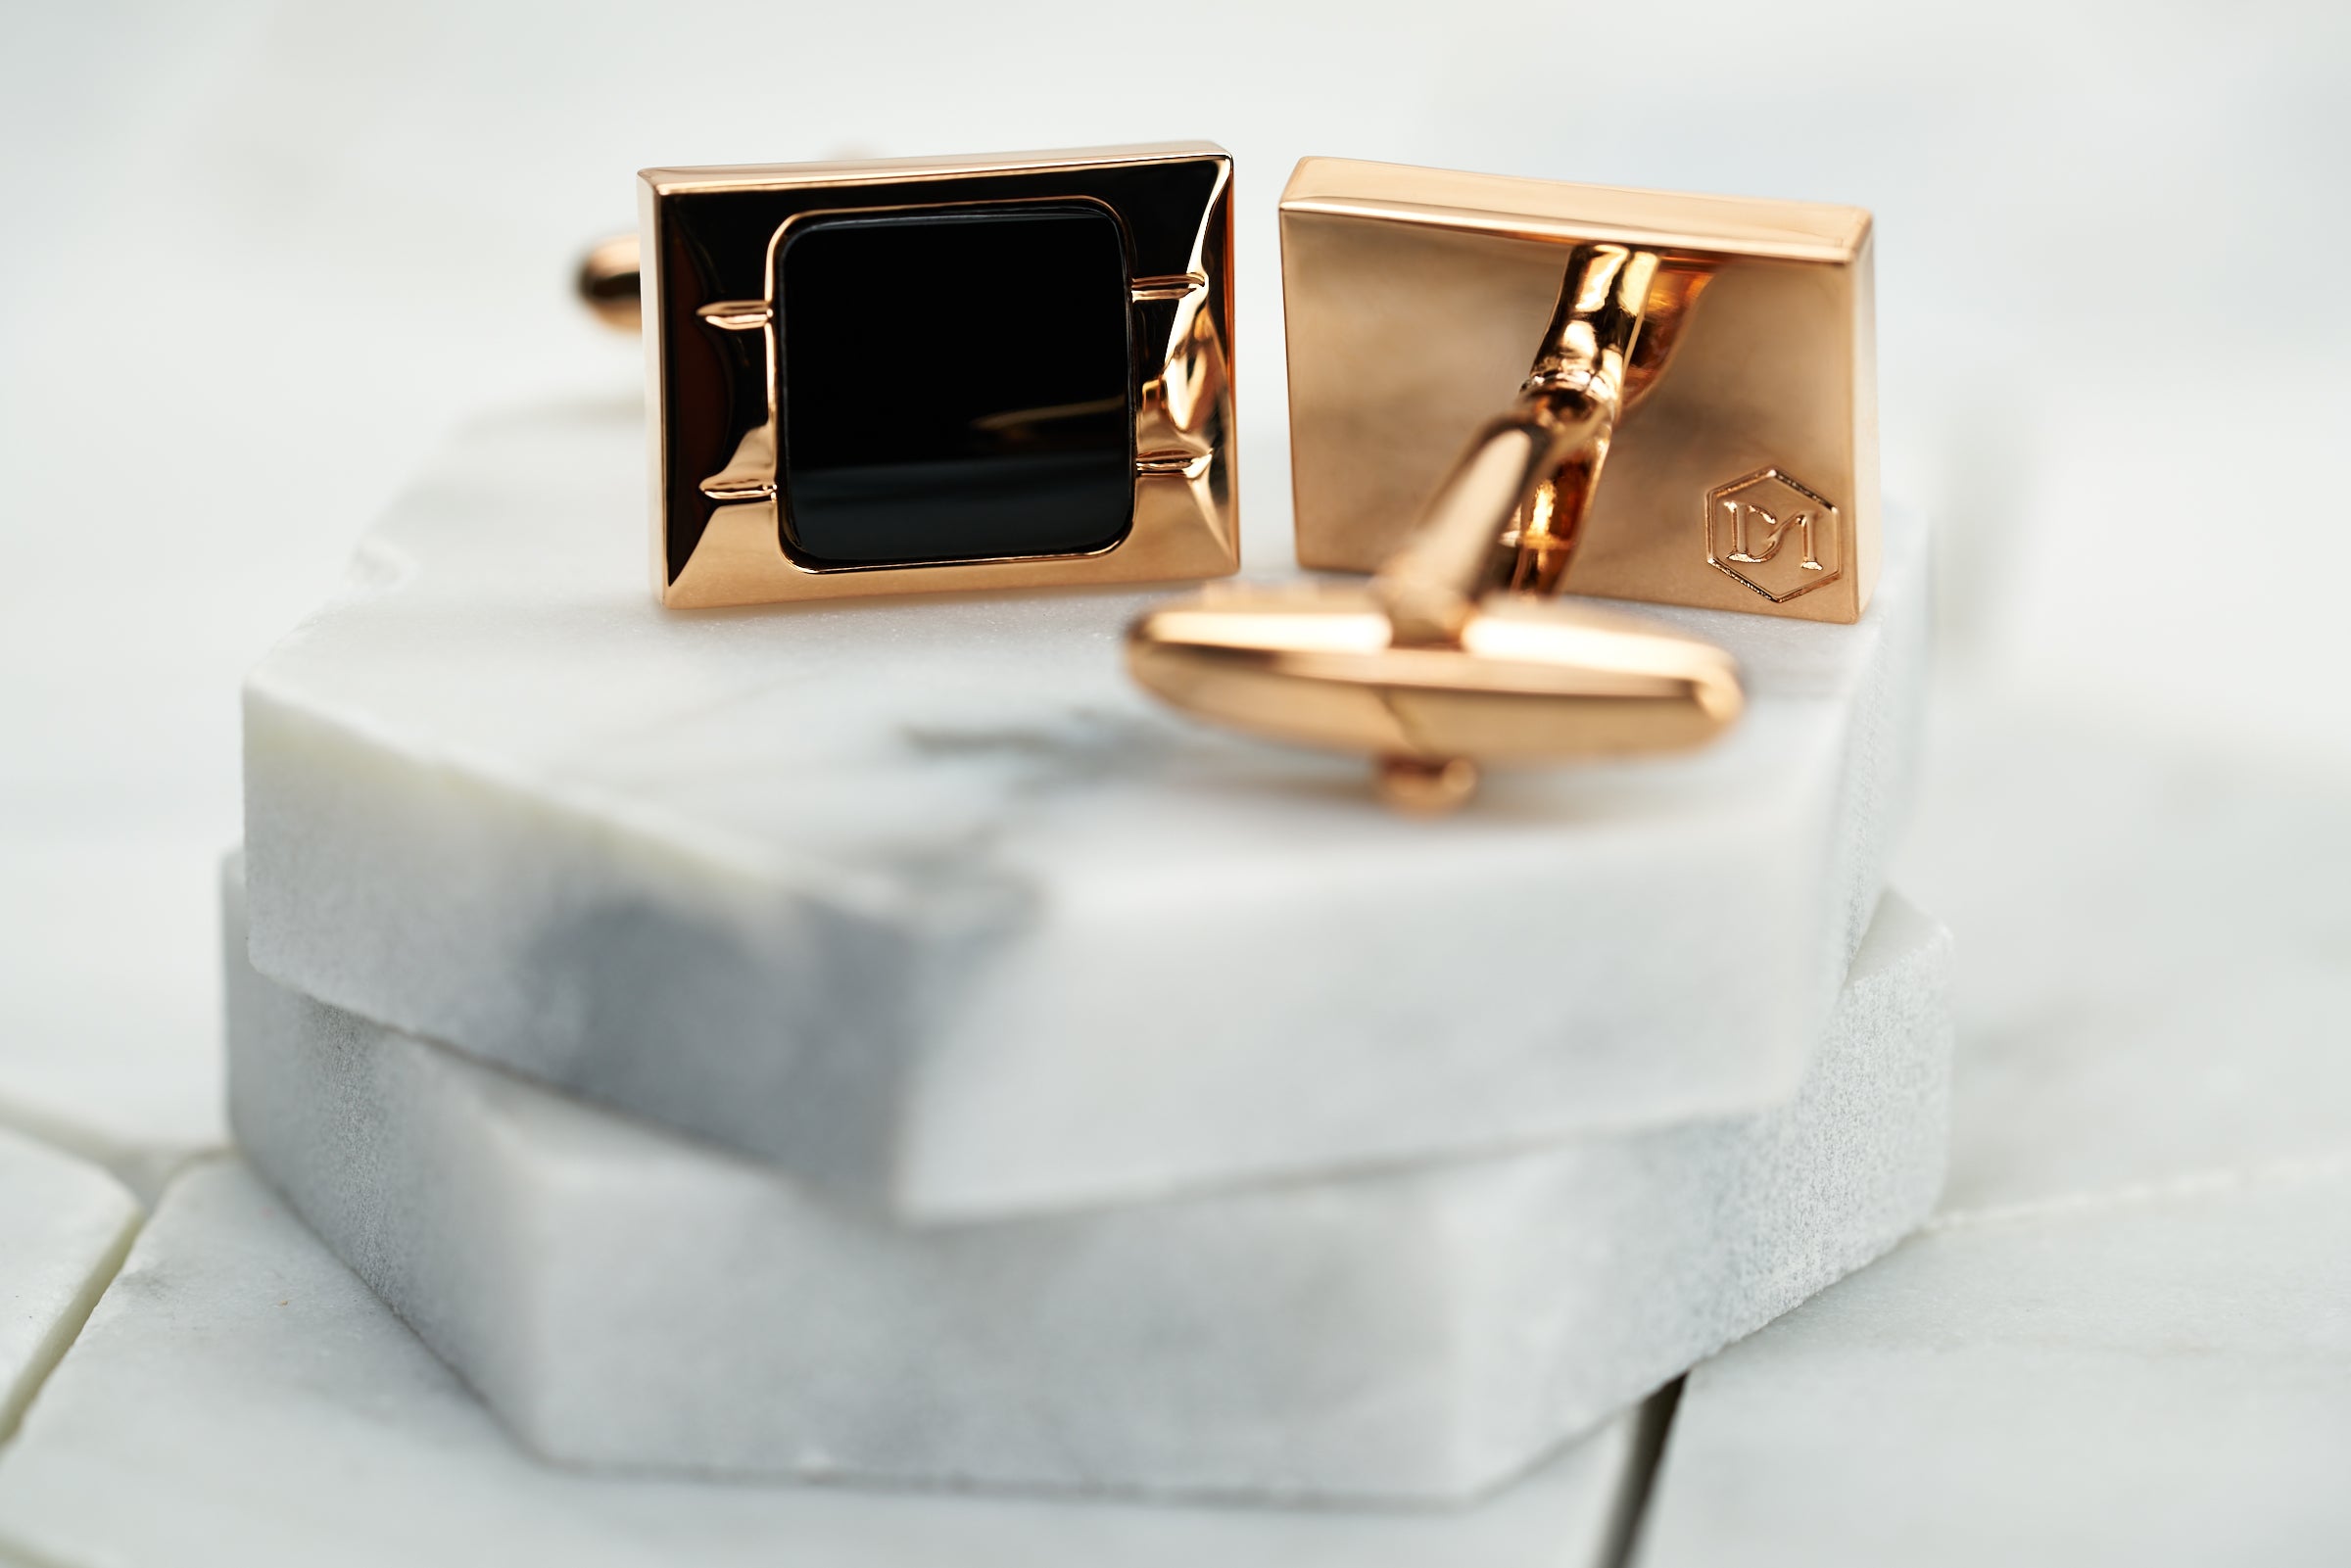 A product image featuring a pair of rose gold cufflinks by Dear Martian. The image depicts the front side, which has a solid black enameled center and the back of the cufflink, which shows the DM hexagon logo.